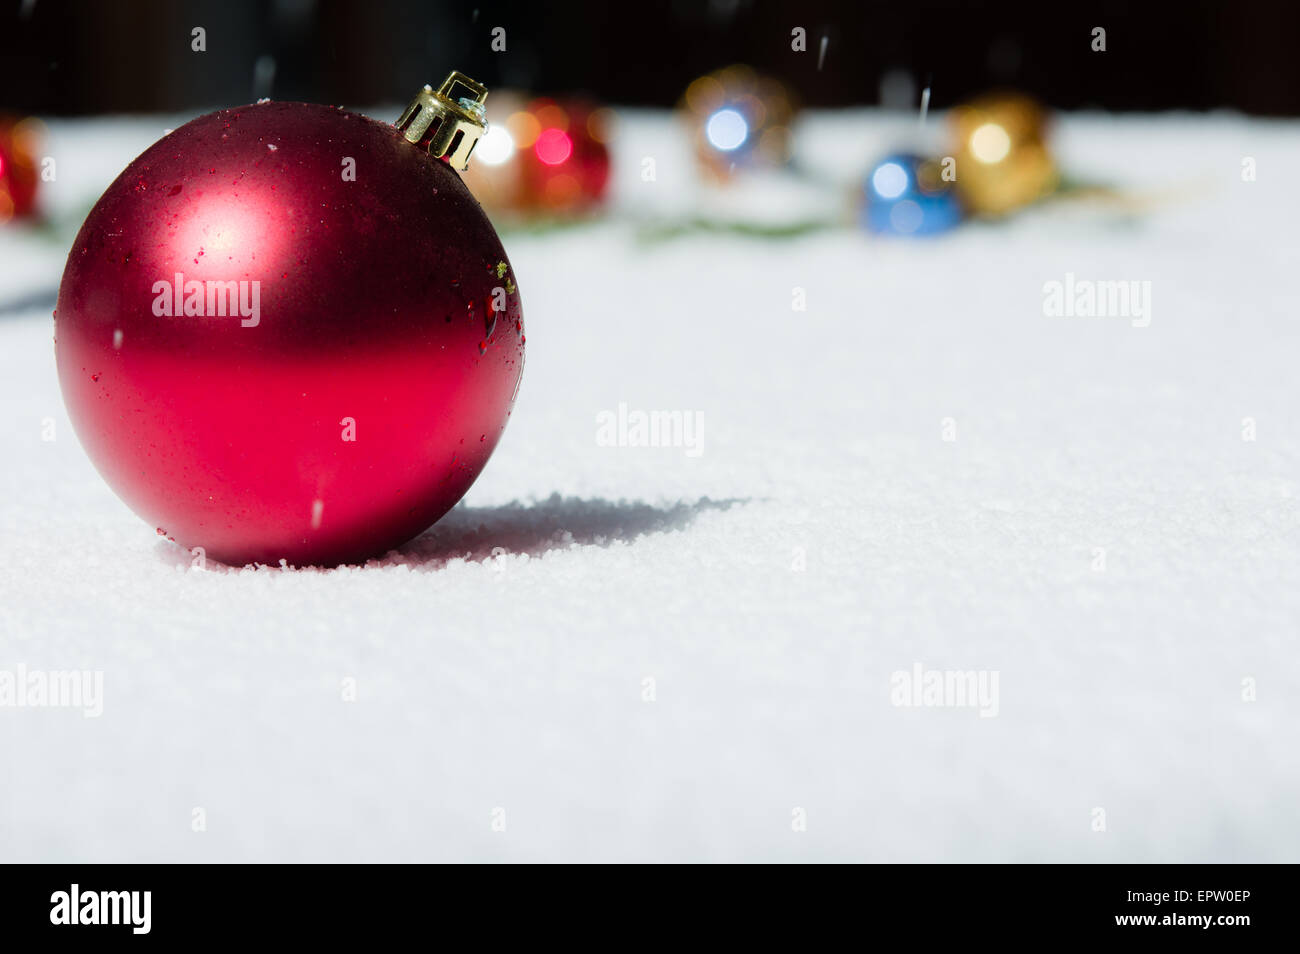 Red Christmas ball with ornaments in background Stock Photo